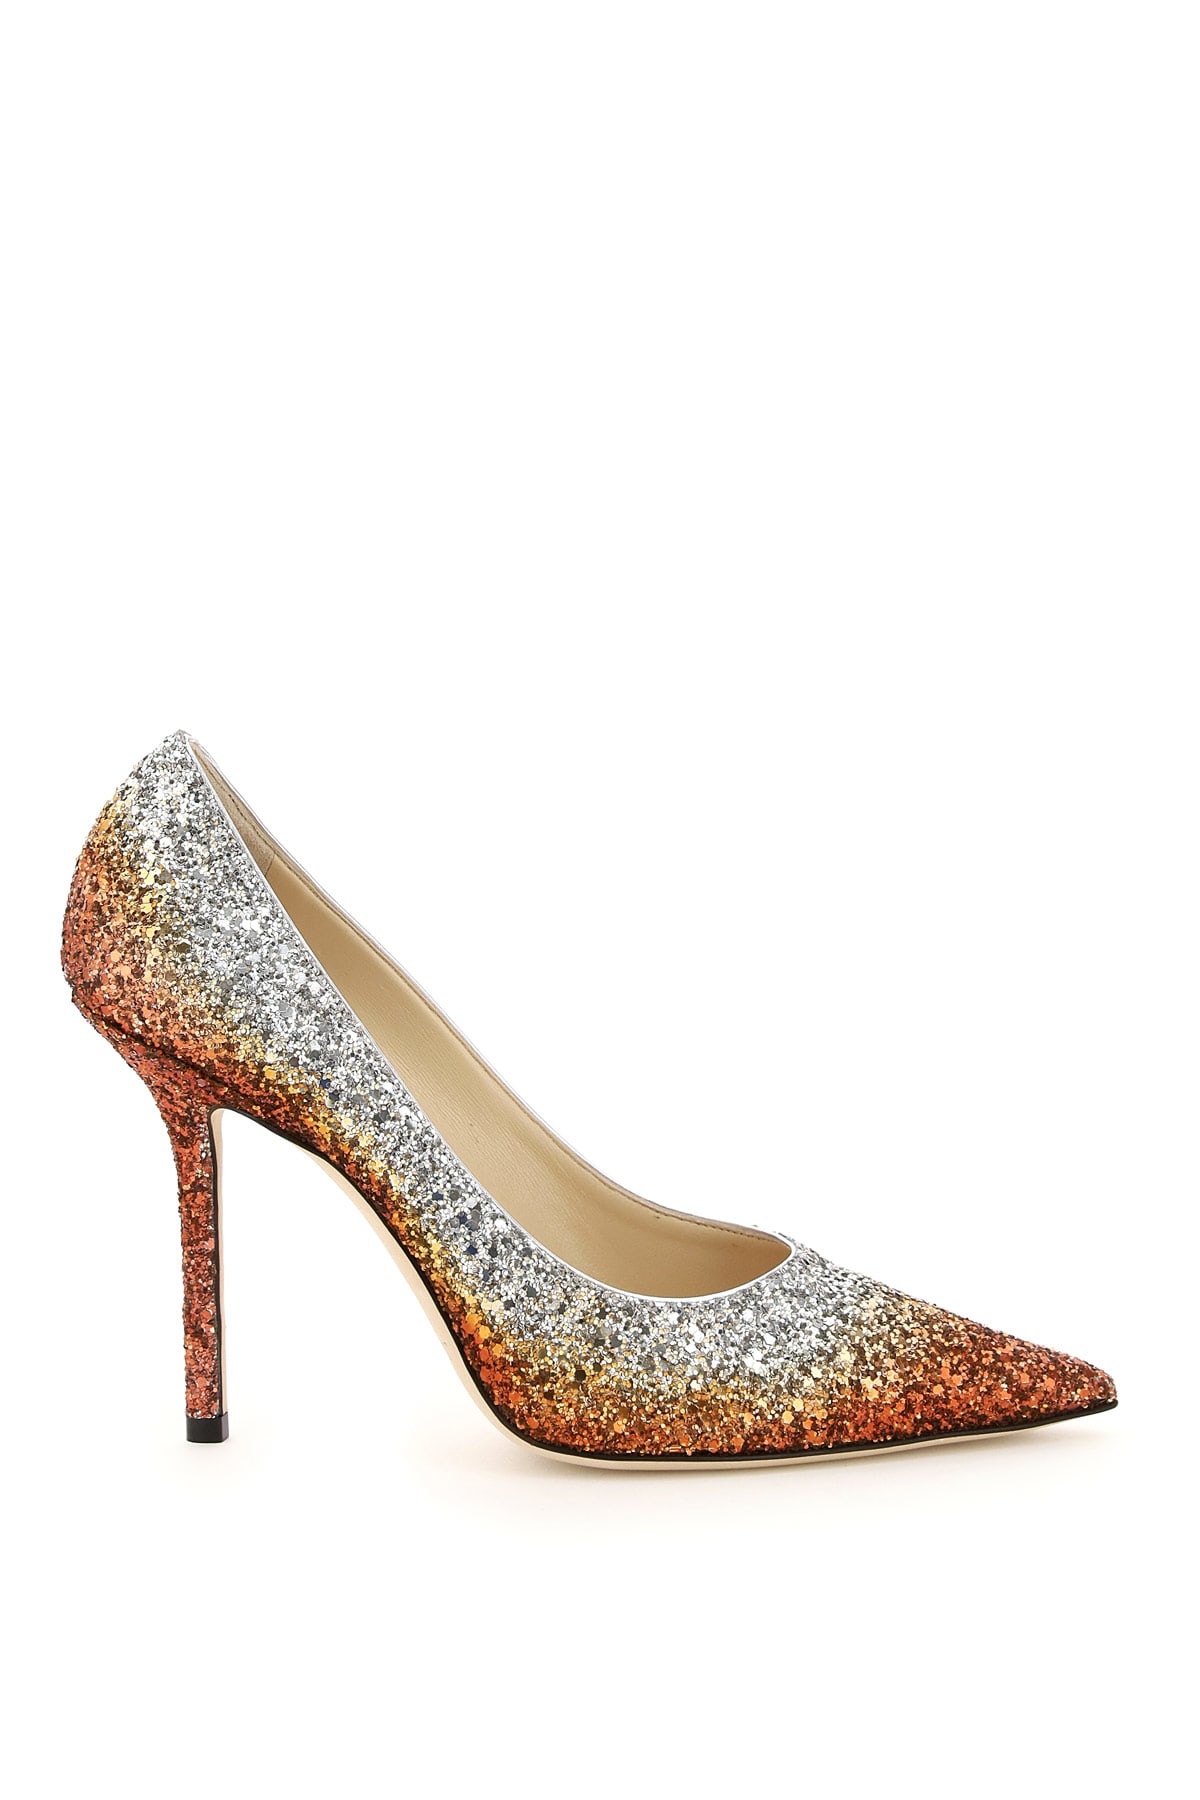 Buy Jimmy Choo Love 100 Pumps Glitter Dynamic online, shop Jimmy Choo shoes with free shipping